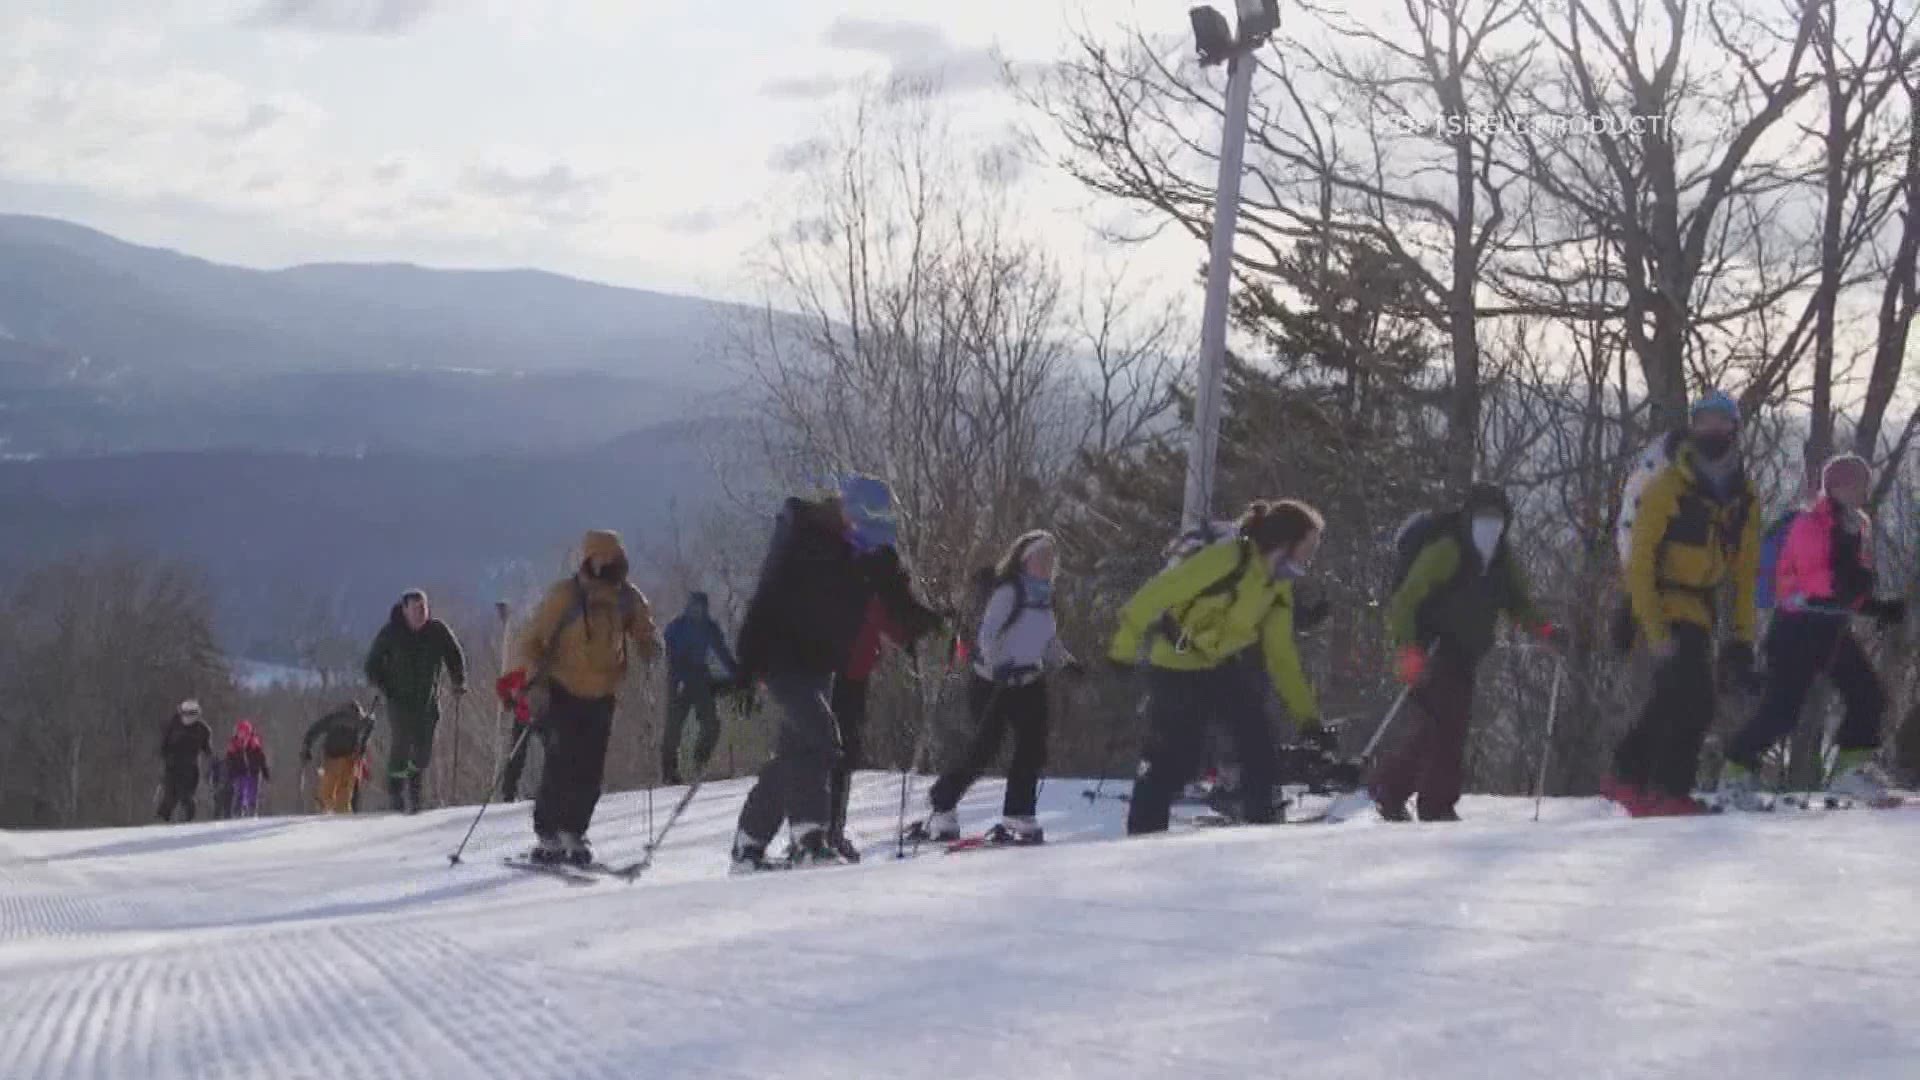 Ski touring, or "skinning", is a combination between traditional downhill skiing and cross country uphill skiing; and it's popularity is growing in Maine.